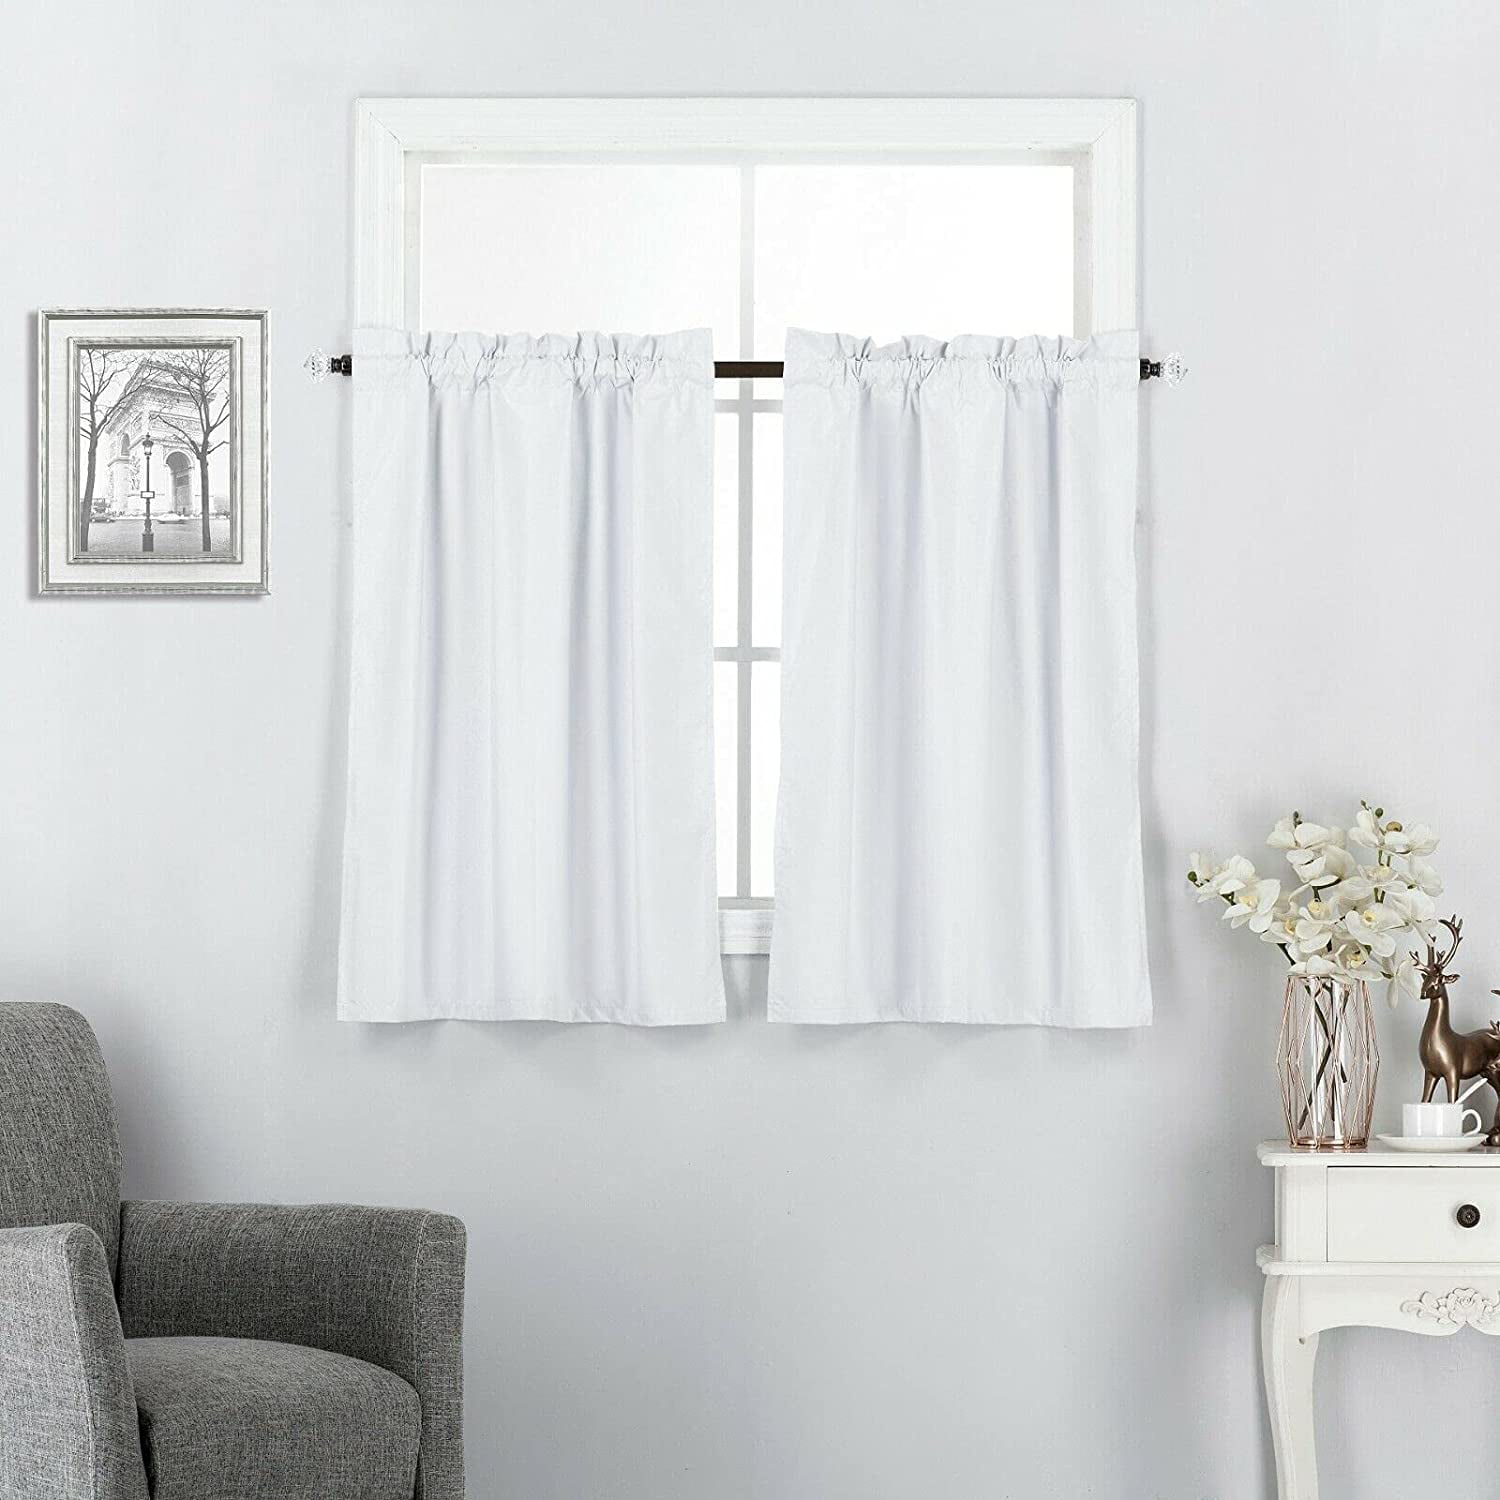 Insulated Blackout Curtains 24 Inch, White Short Curtains Blackout